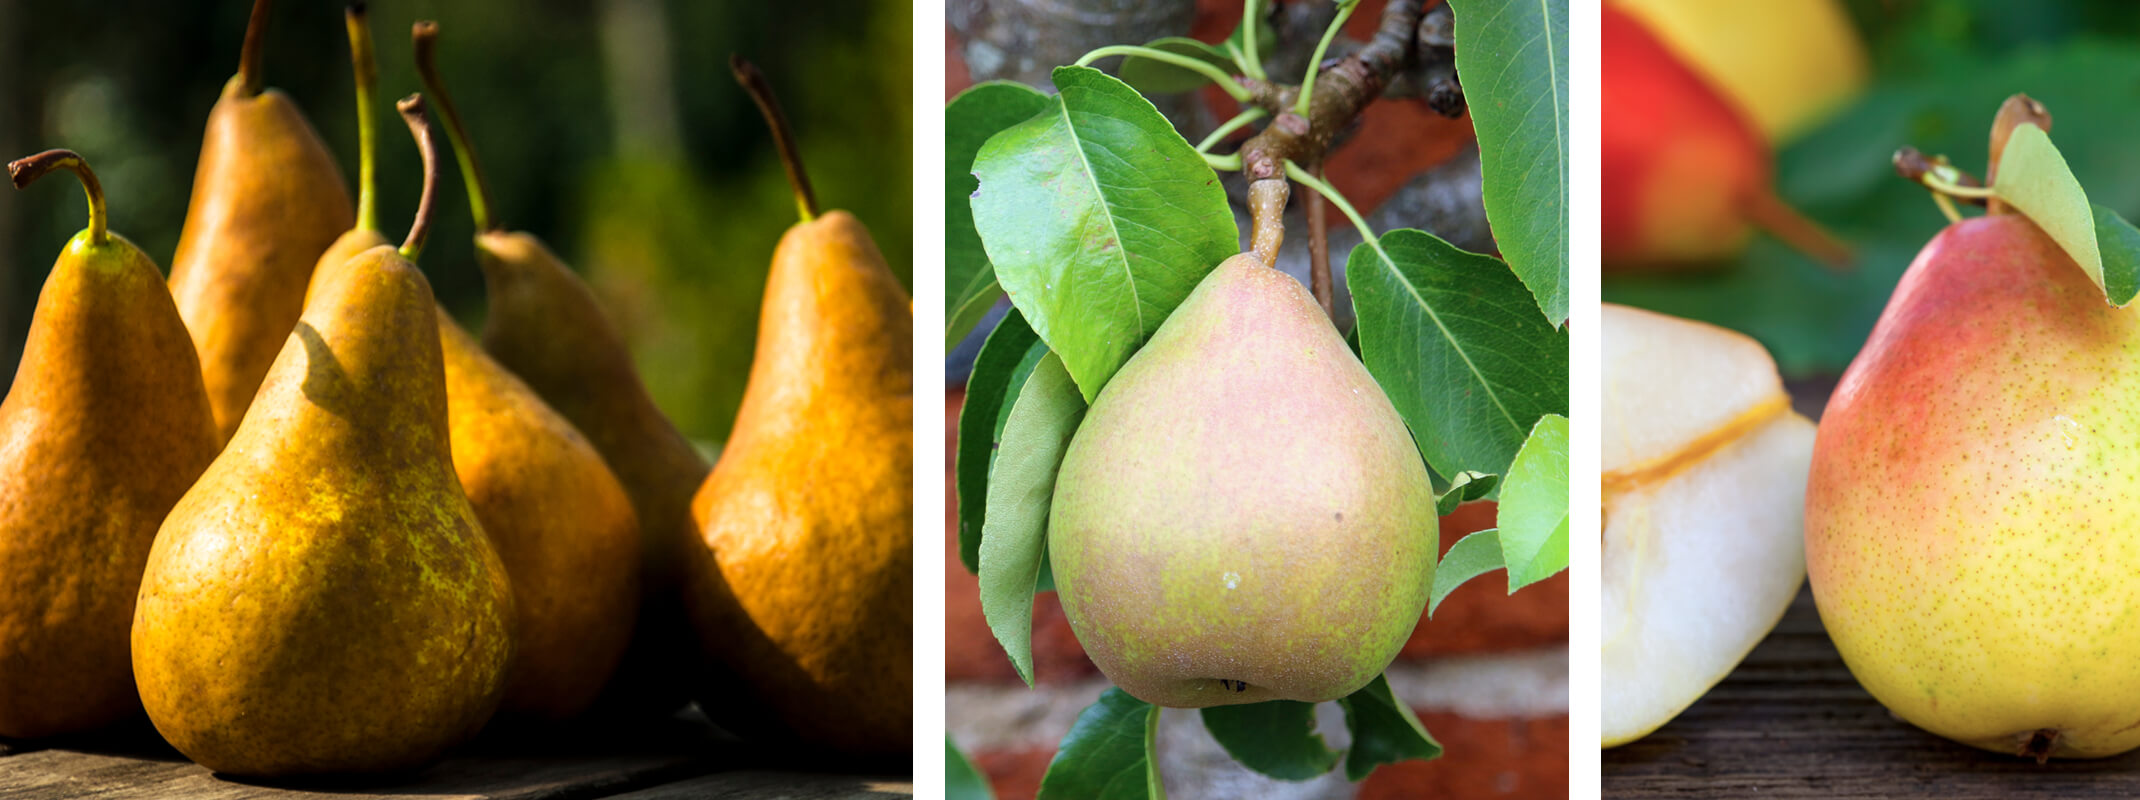 Bosc pears on a table and a comice pear hanging from a tree a third image of a bartlett pear and a half on a table